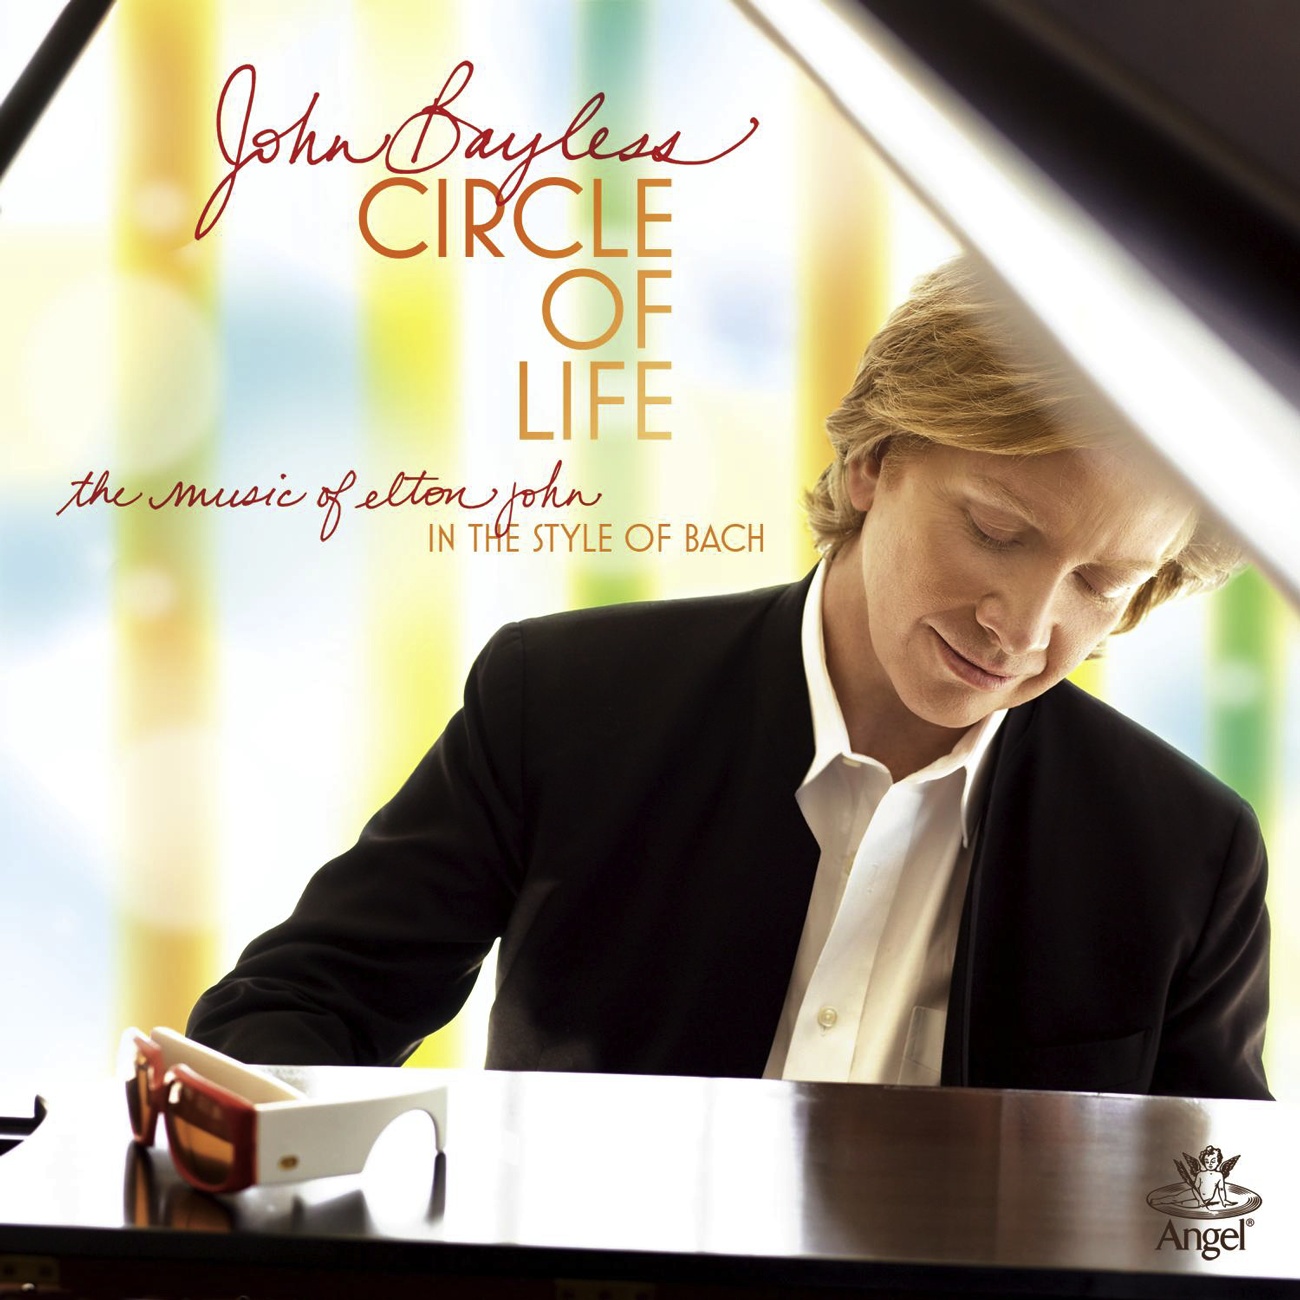 The Circle Of Life / Bach Improvisations On Themes By Elton John